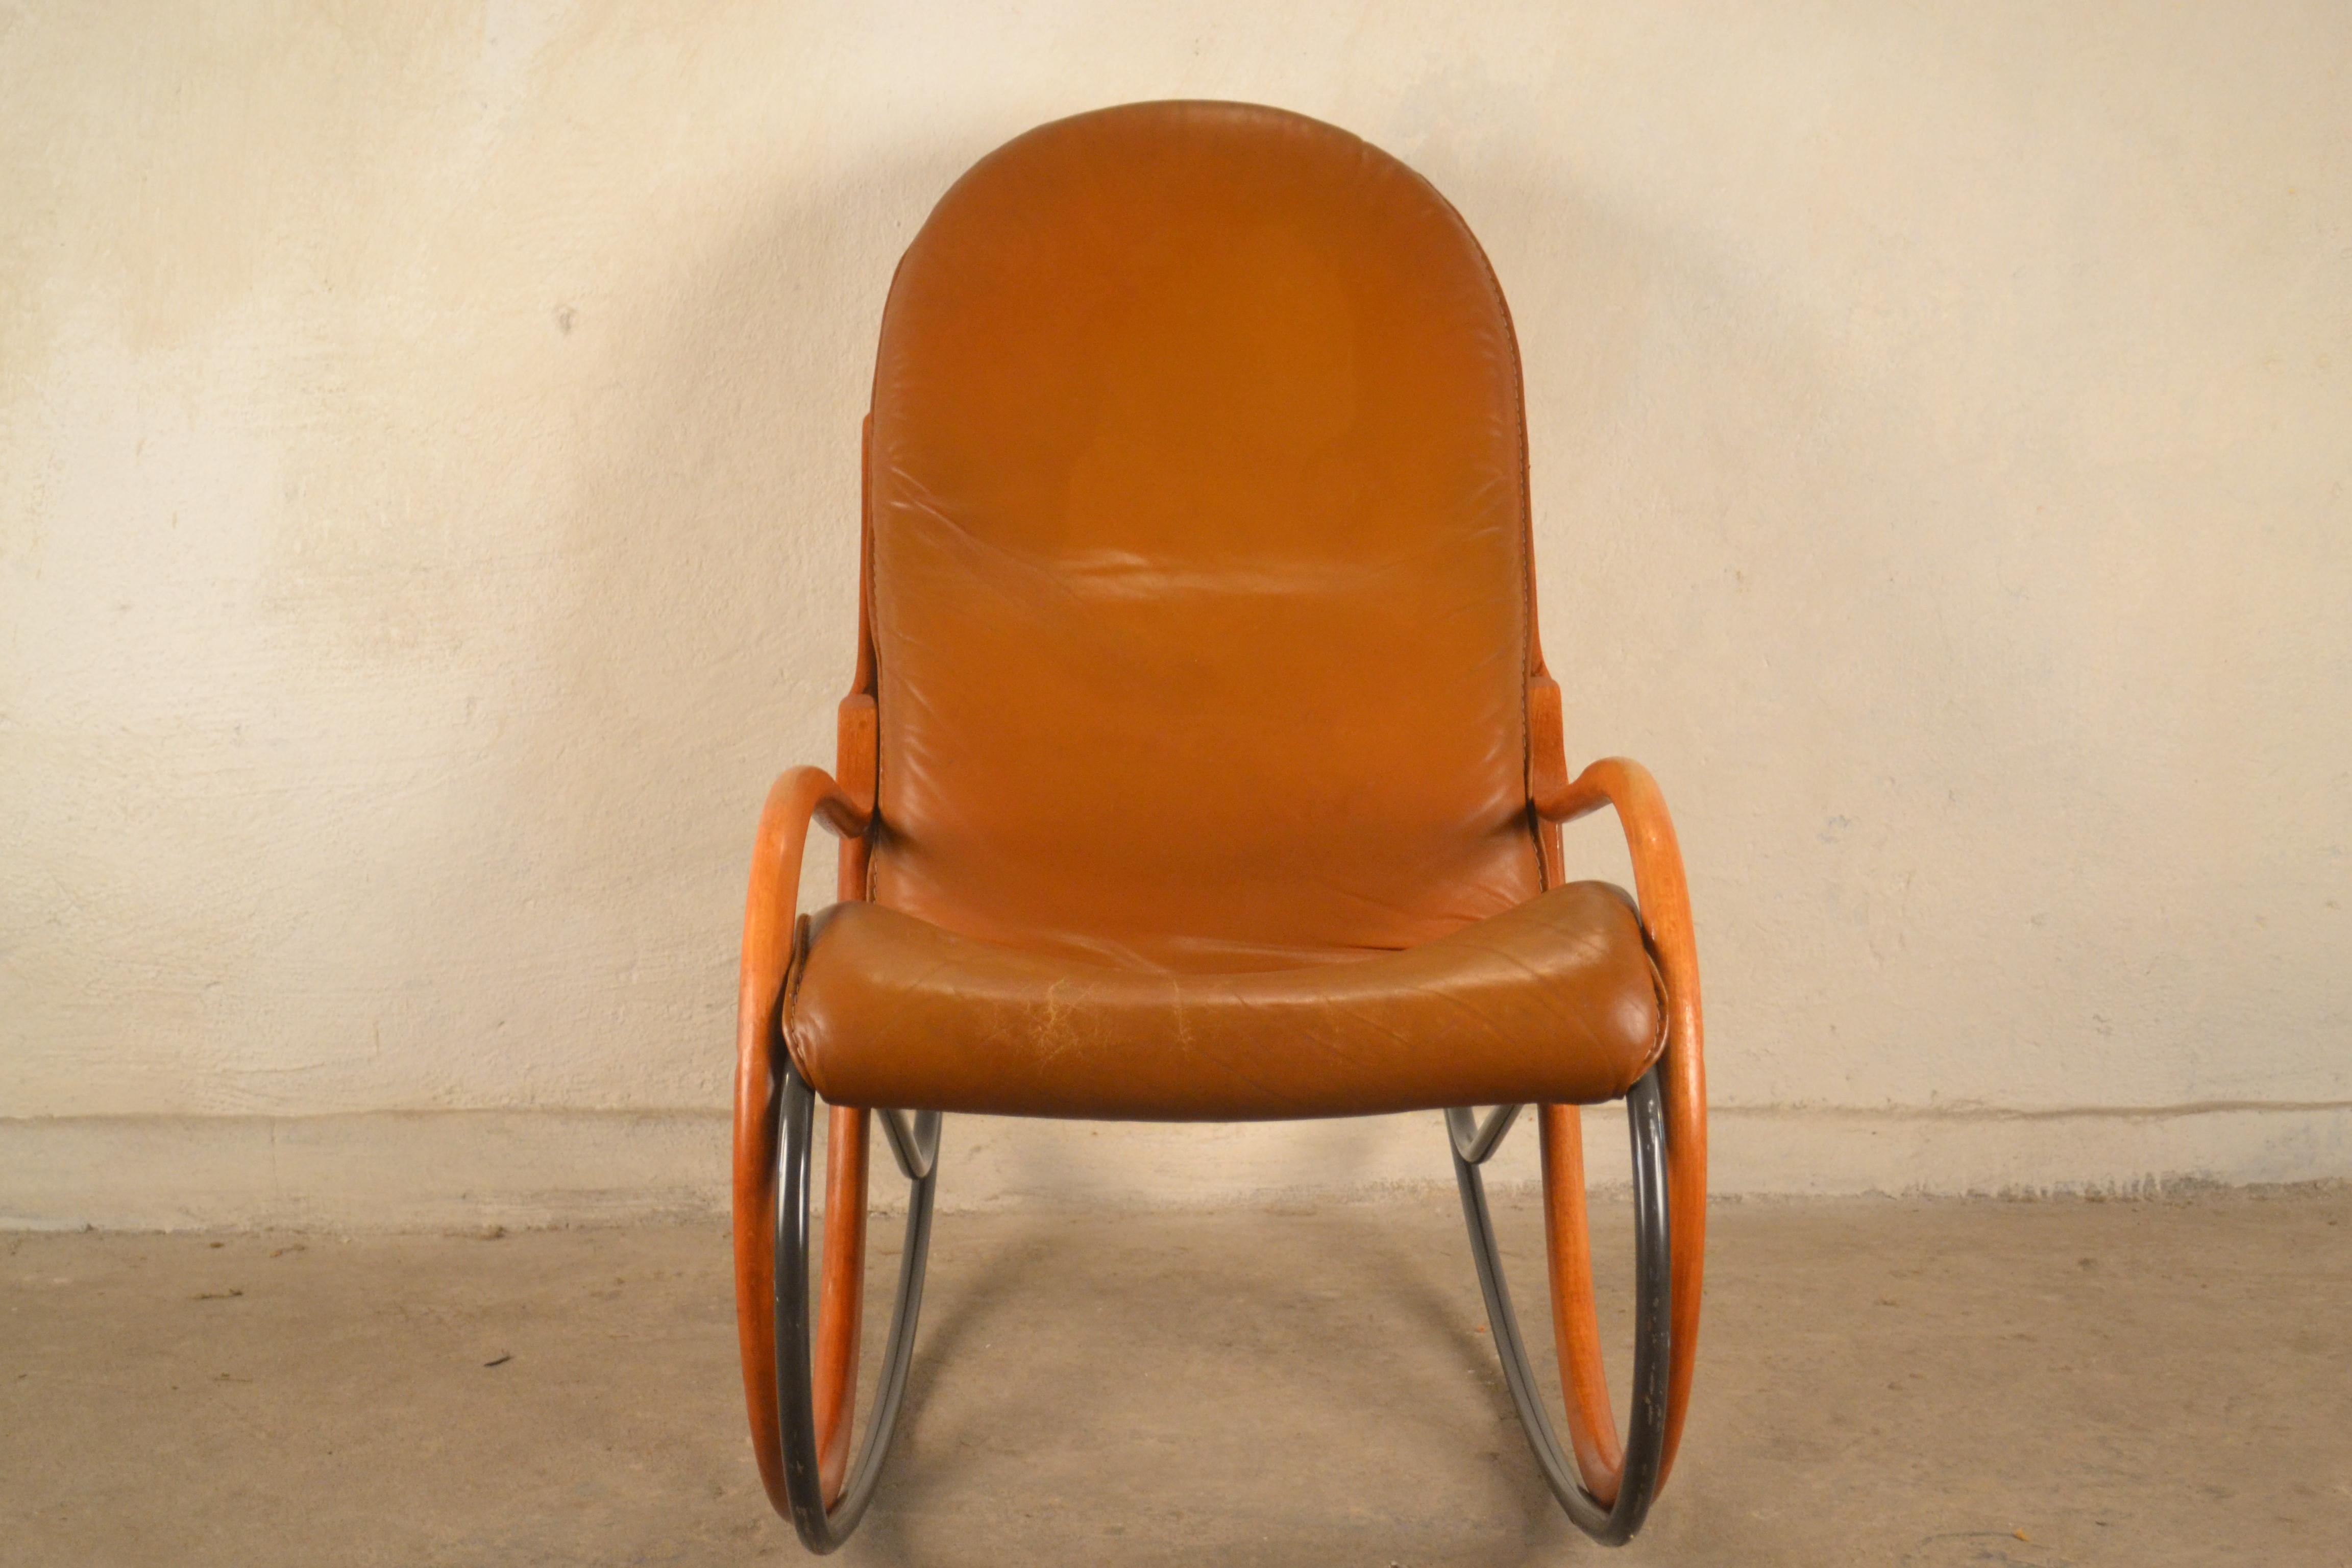 A rocking chair designed by Paul Tuttle, Strässle, Switzerland in the 1970s Fully original, without renovation. The chair uses the highest quality natural leather. There are visible traces of streaks on the back of the material. In general, the